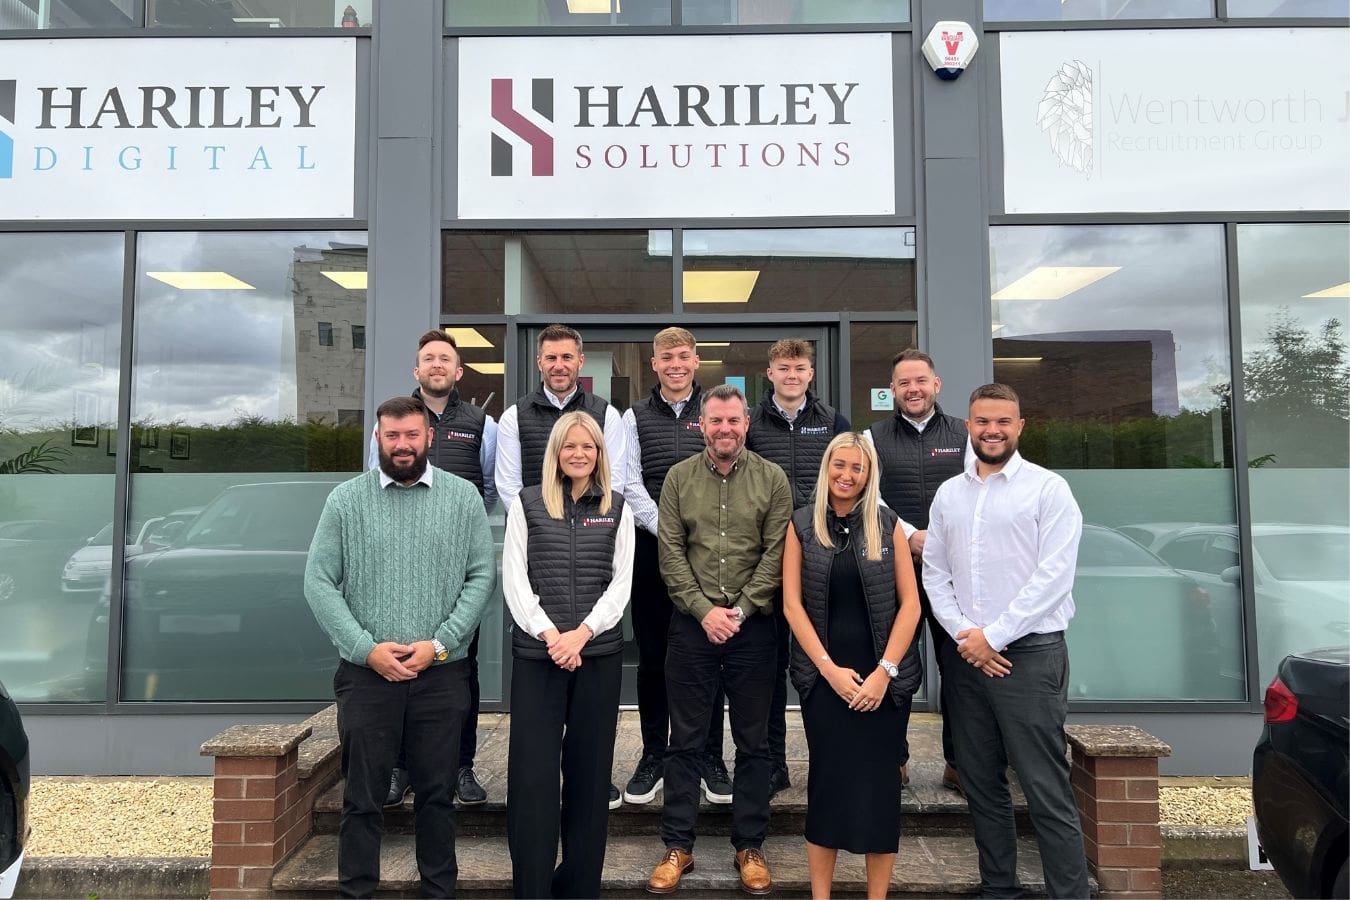 Hariley Solutions